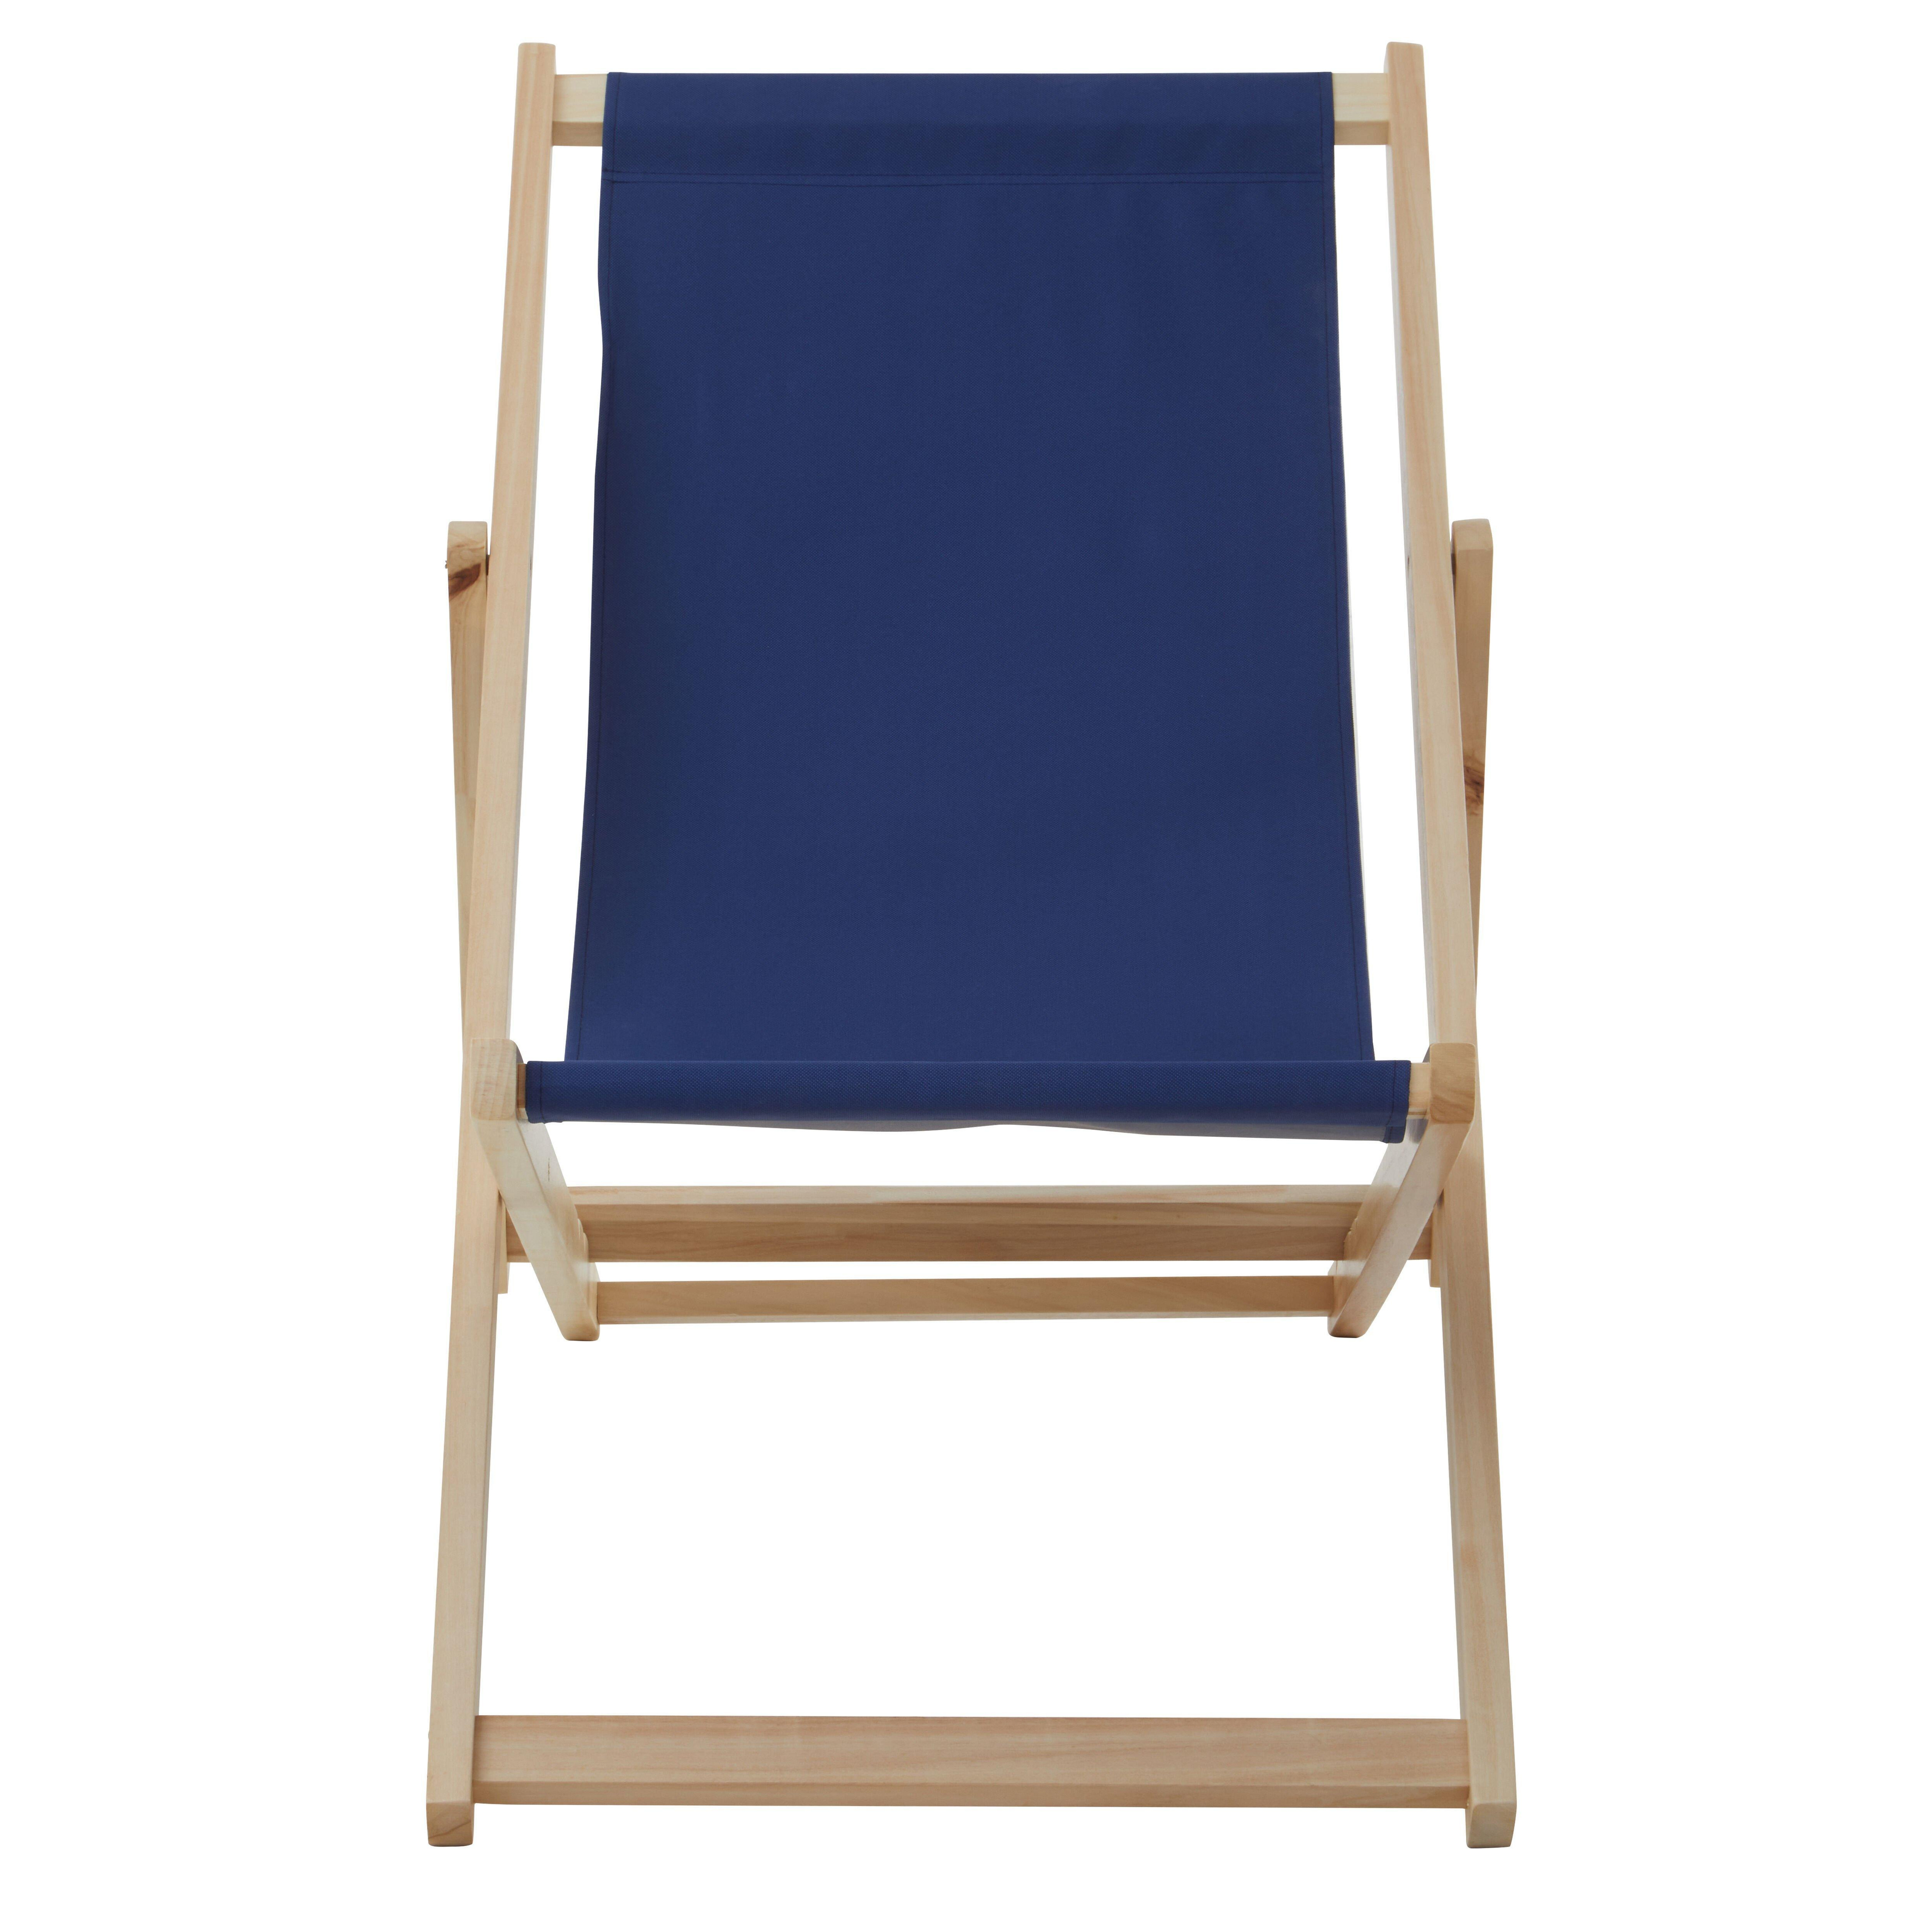 Ethically Sourced Stylish Deckchair - image 1